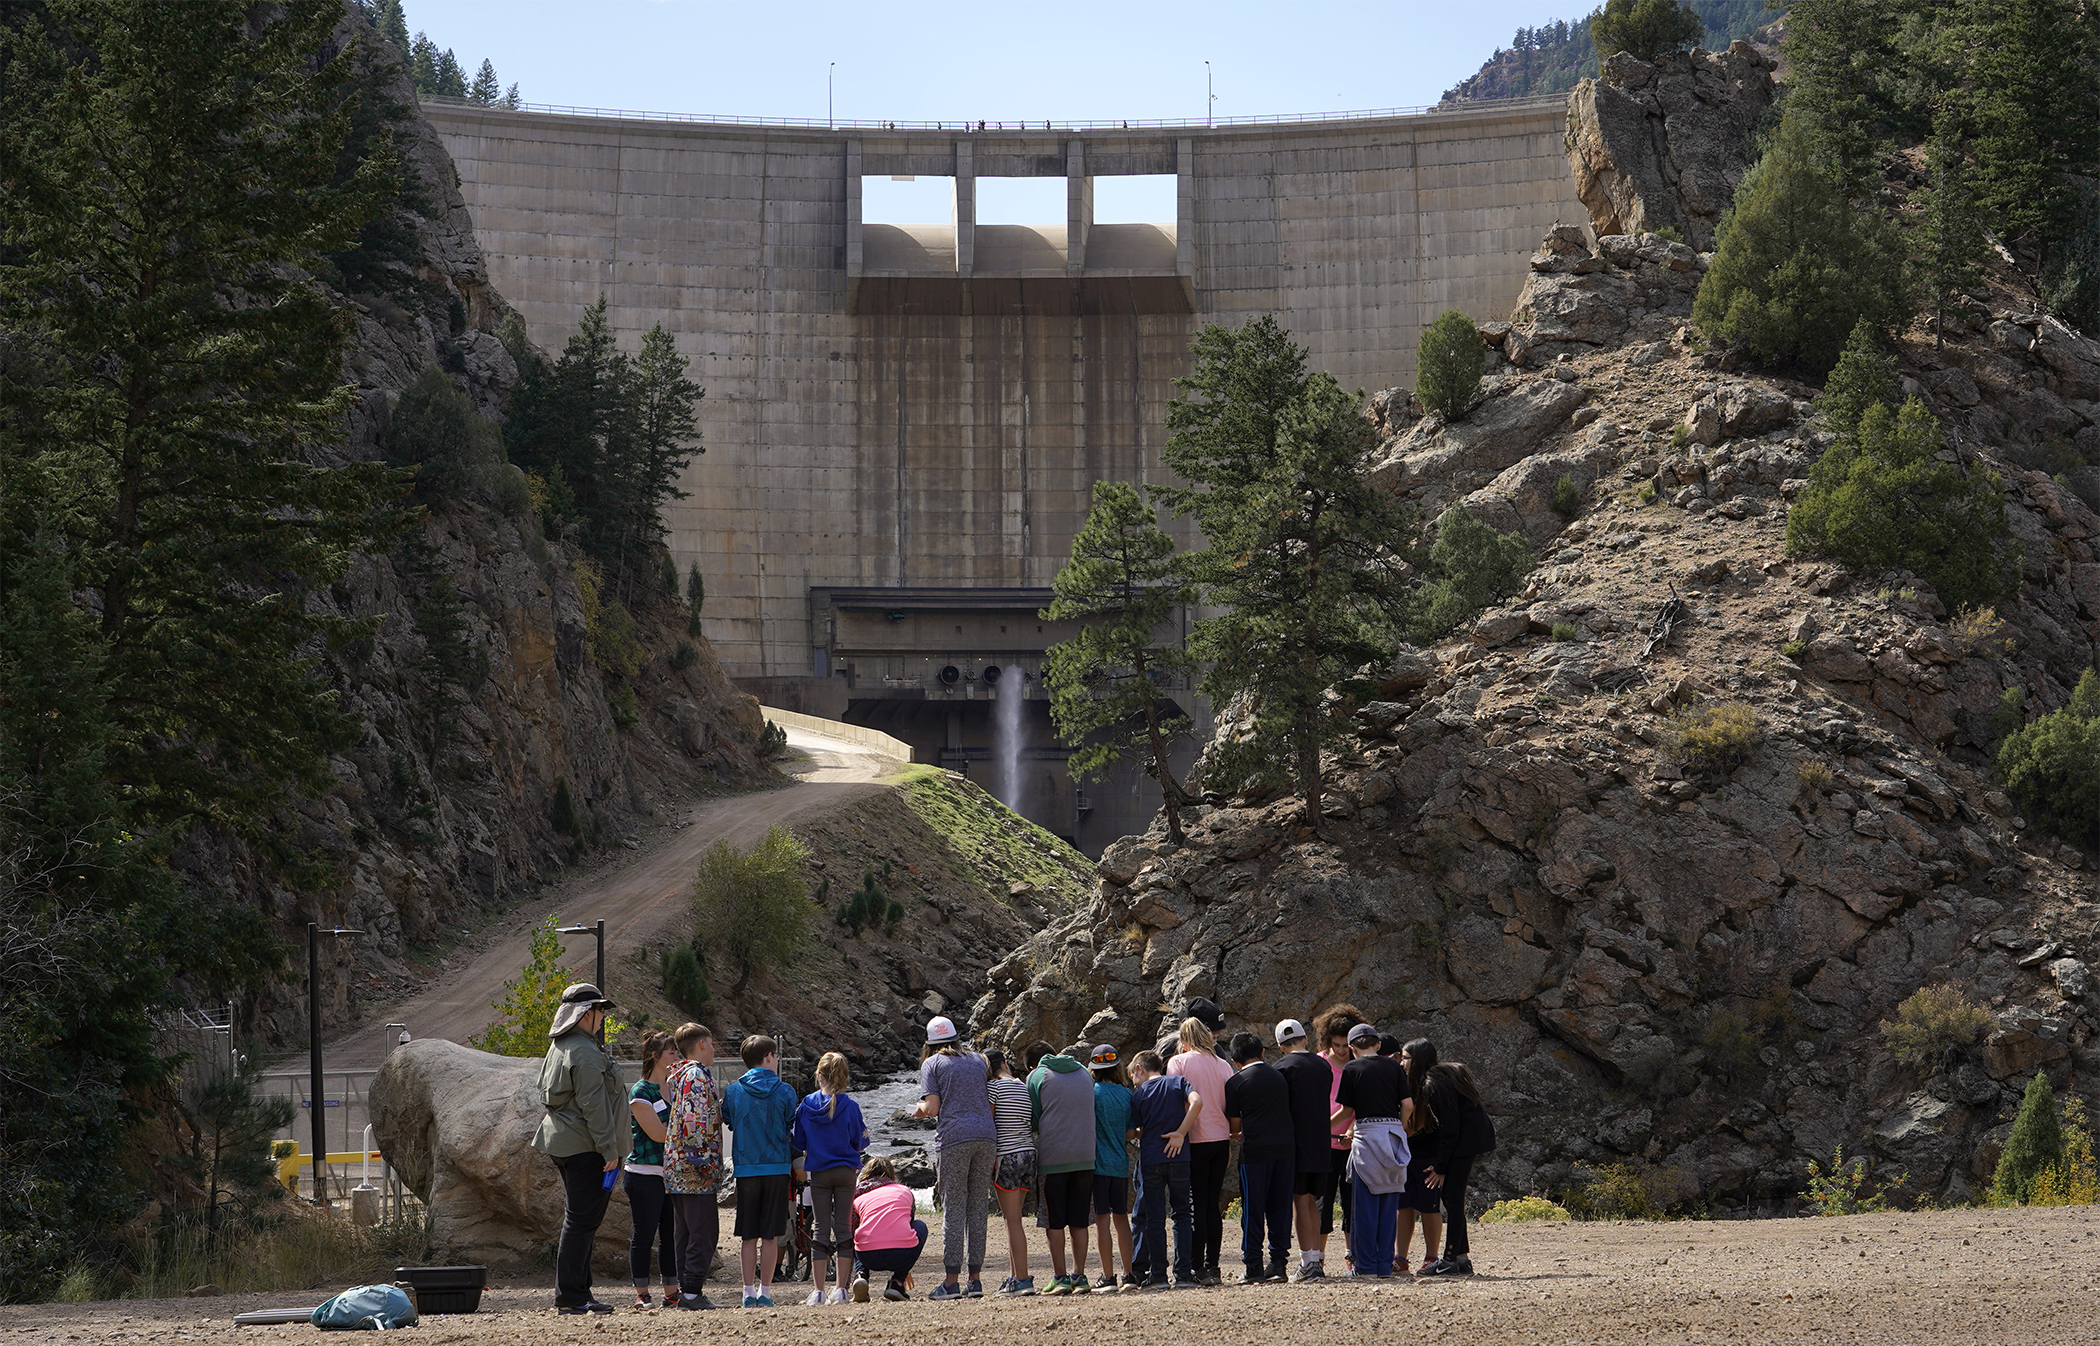 This photo shows students standing in front of a dam.